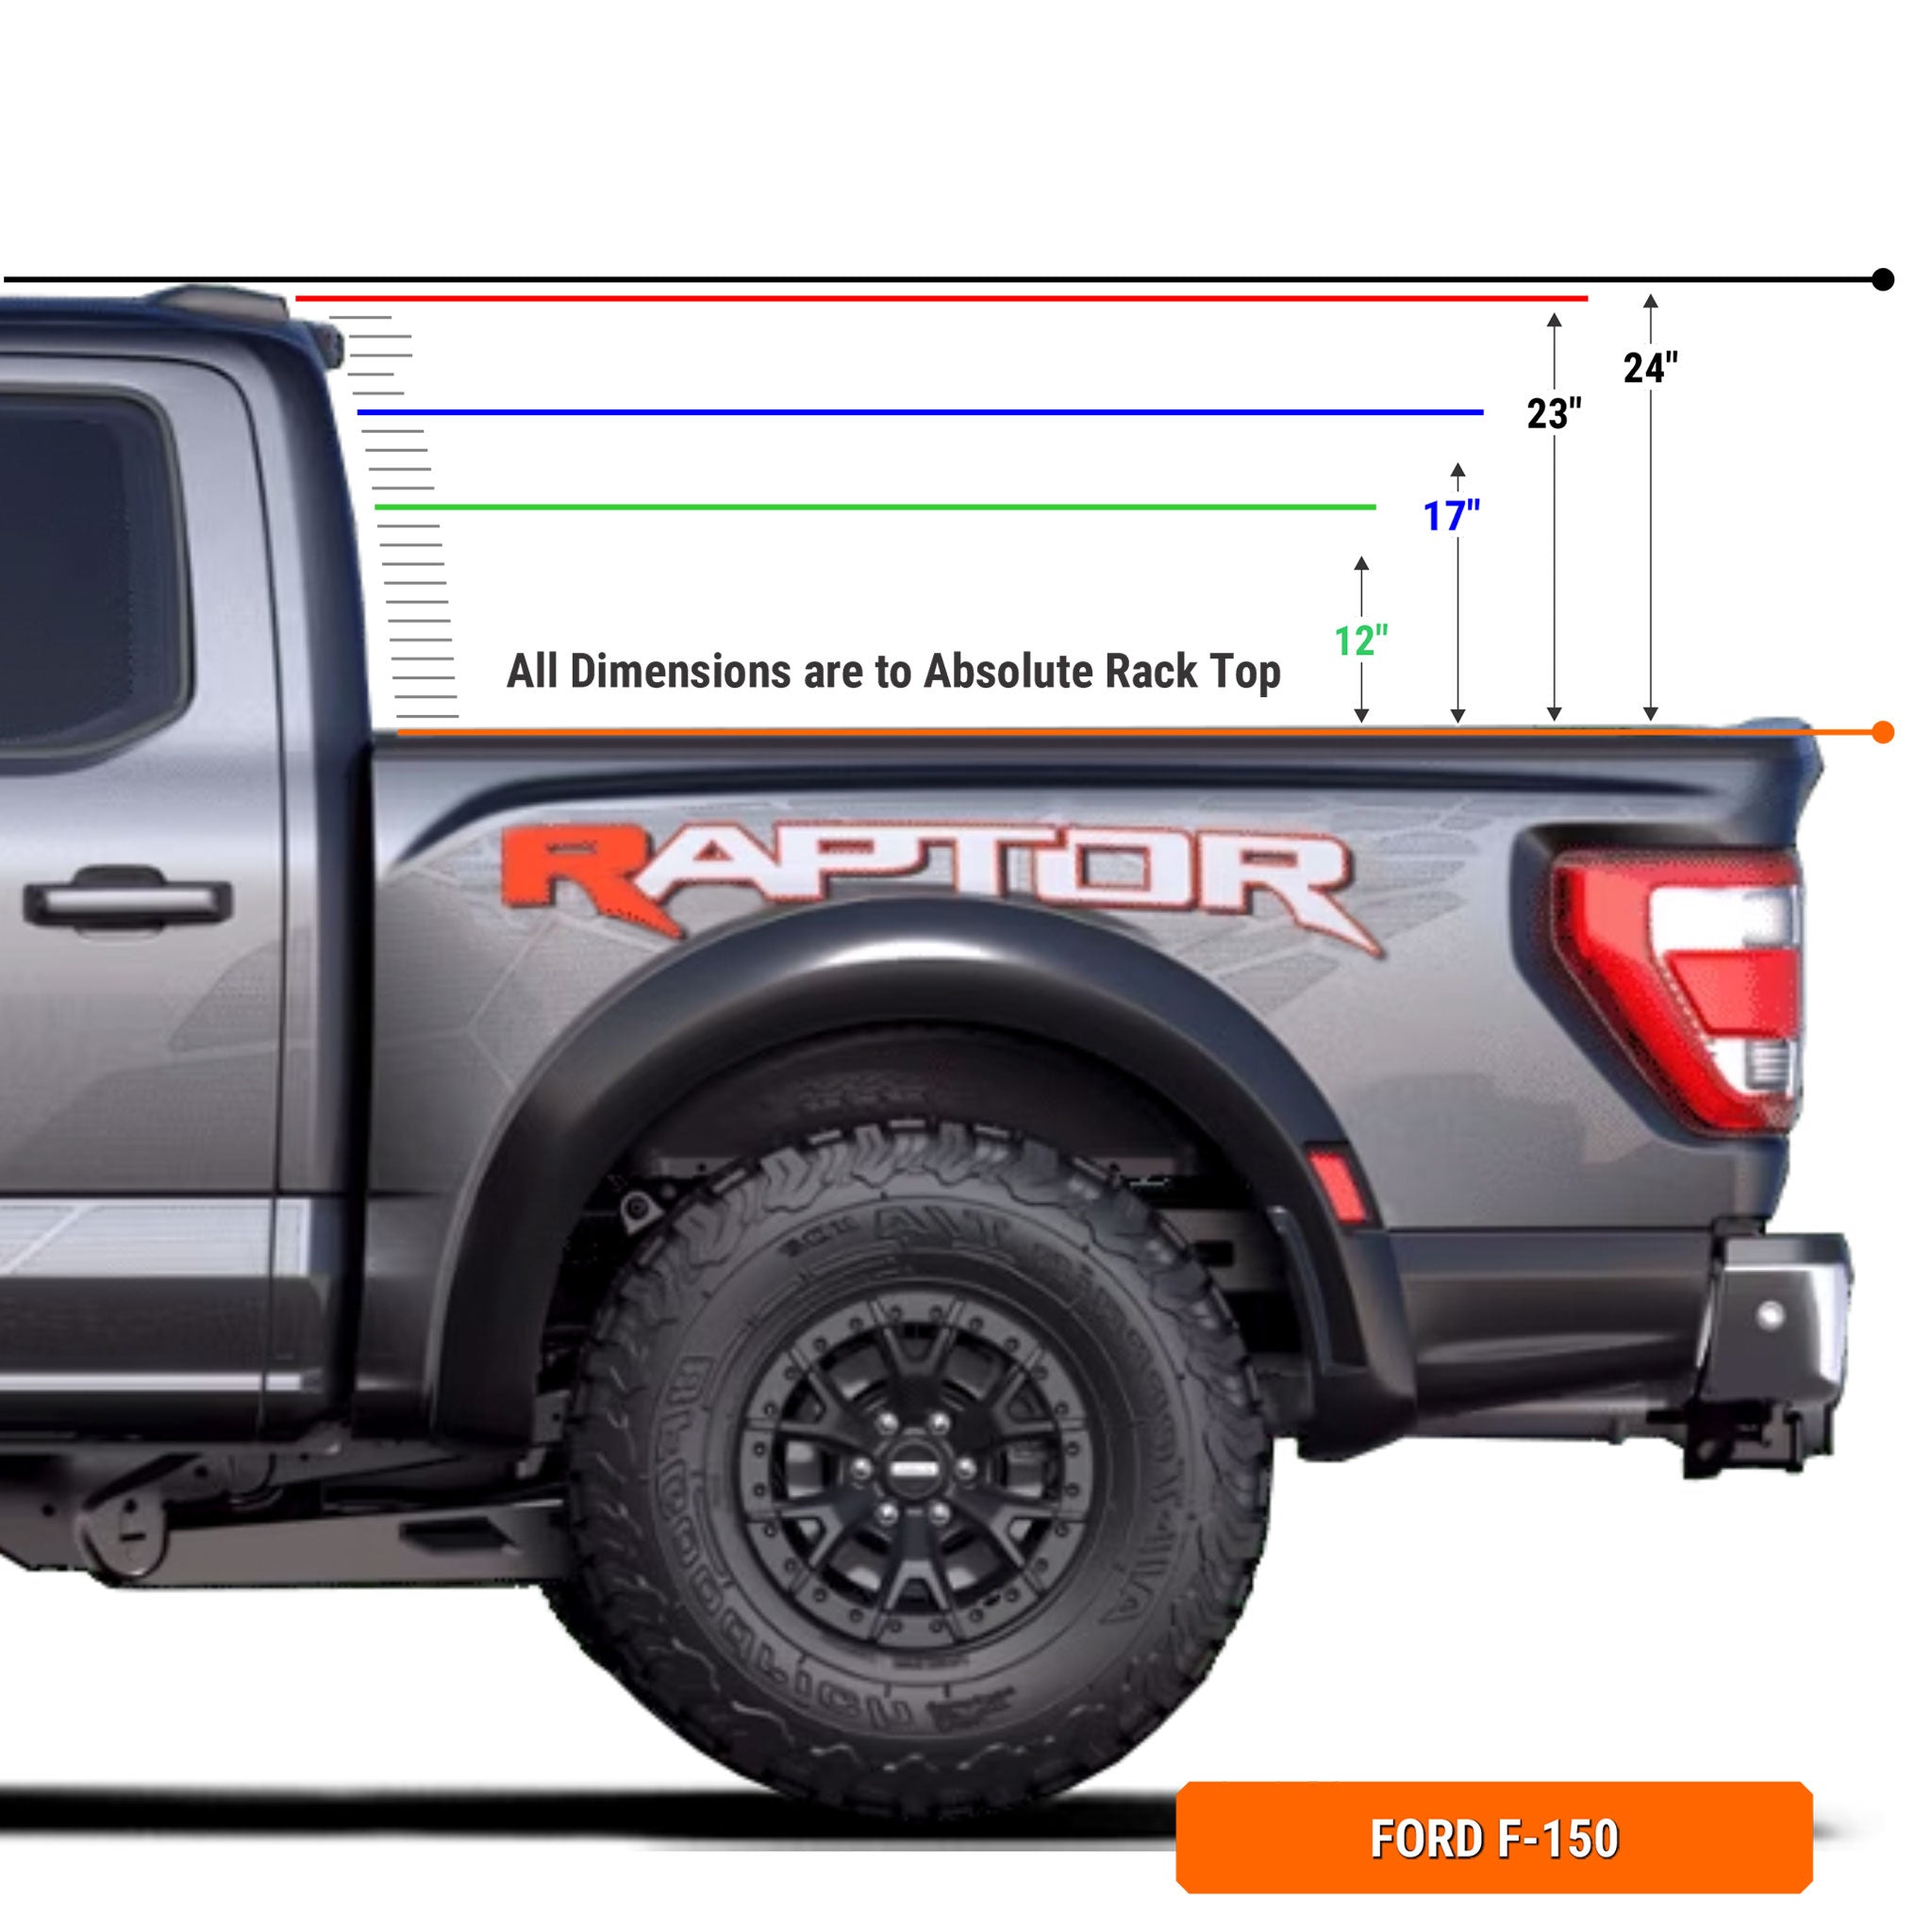 F150 Bed Rack Height Chart